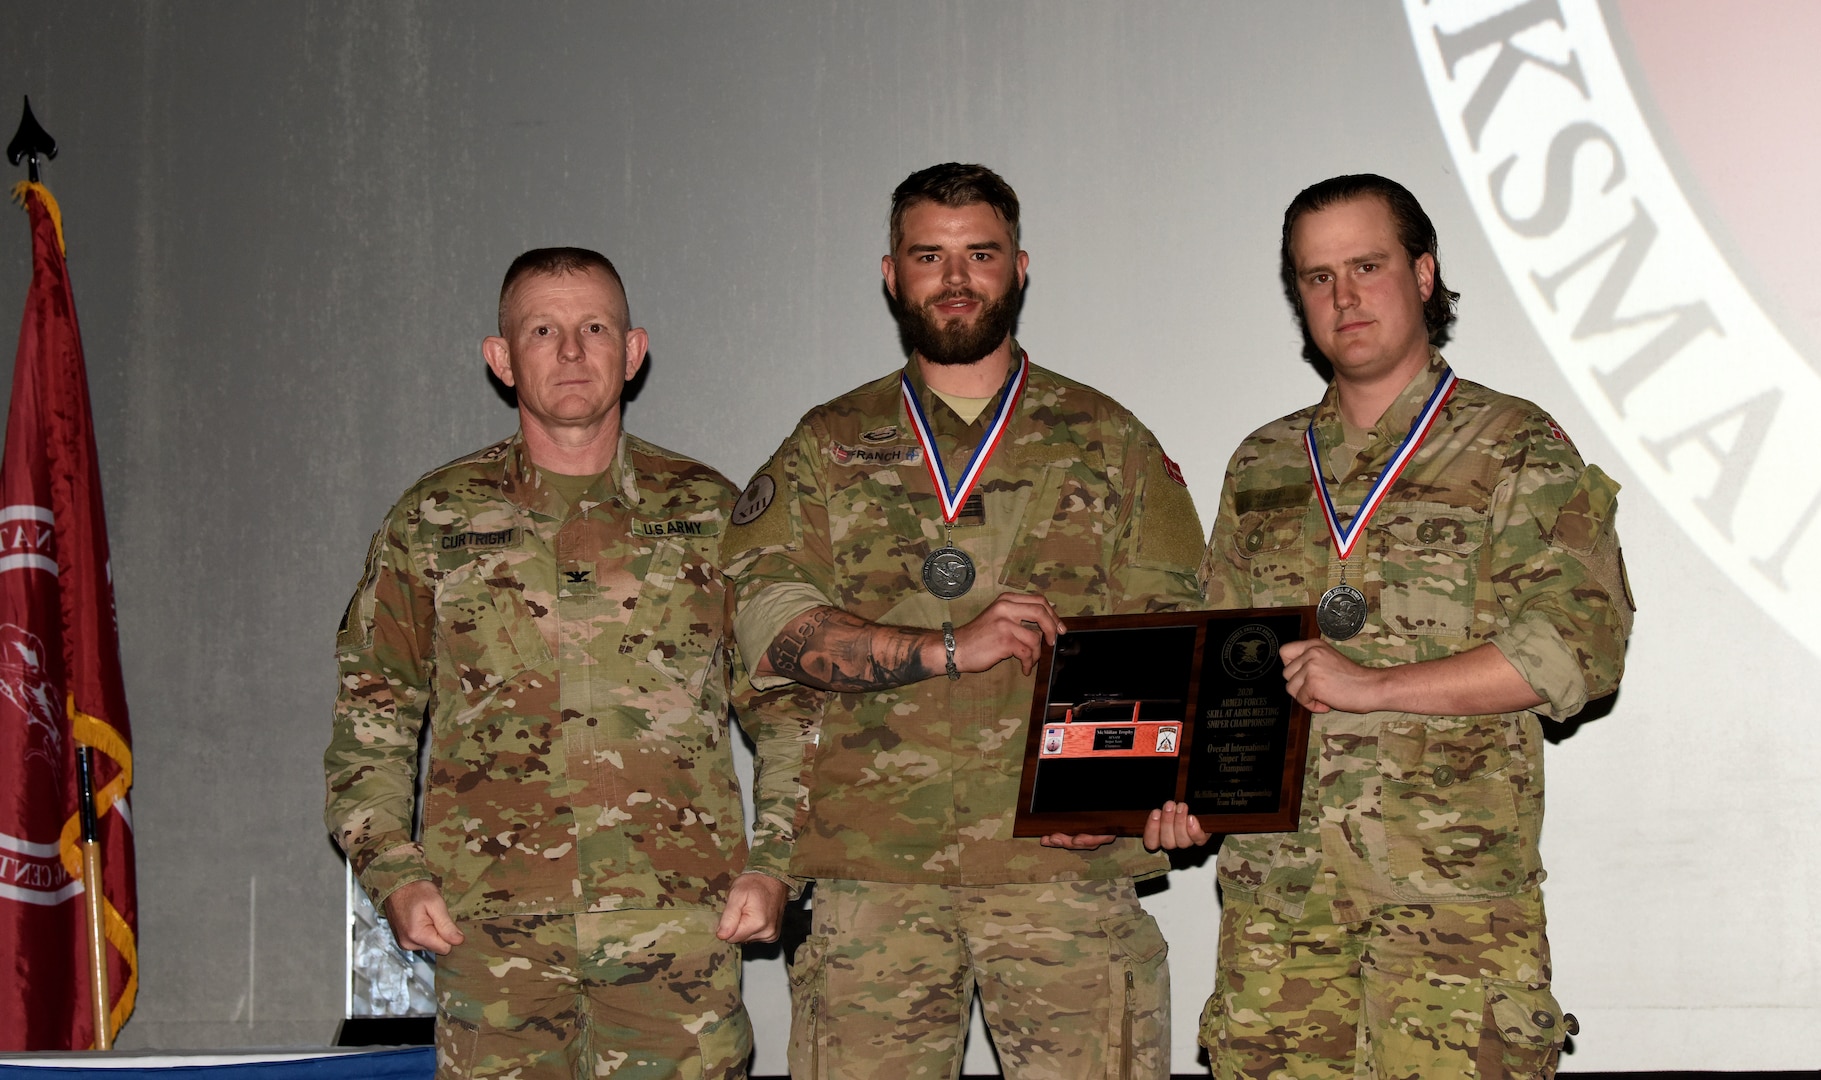 Lance corporals Steven Baunsgaard and Christoffer Franch, a sniper team from Denmark, received the international overall sniper team title and were presented a team plaque and individual medallions by Col. Marty Curtright, National Guard Marksmanship Training Center commander, at Fort Chaffee Joint Maneuver Training Center in Barling, Arkansas, Feb. 20, 2020. A two-person team from the Kansas National Guard won the national competition.